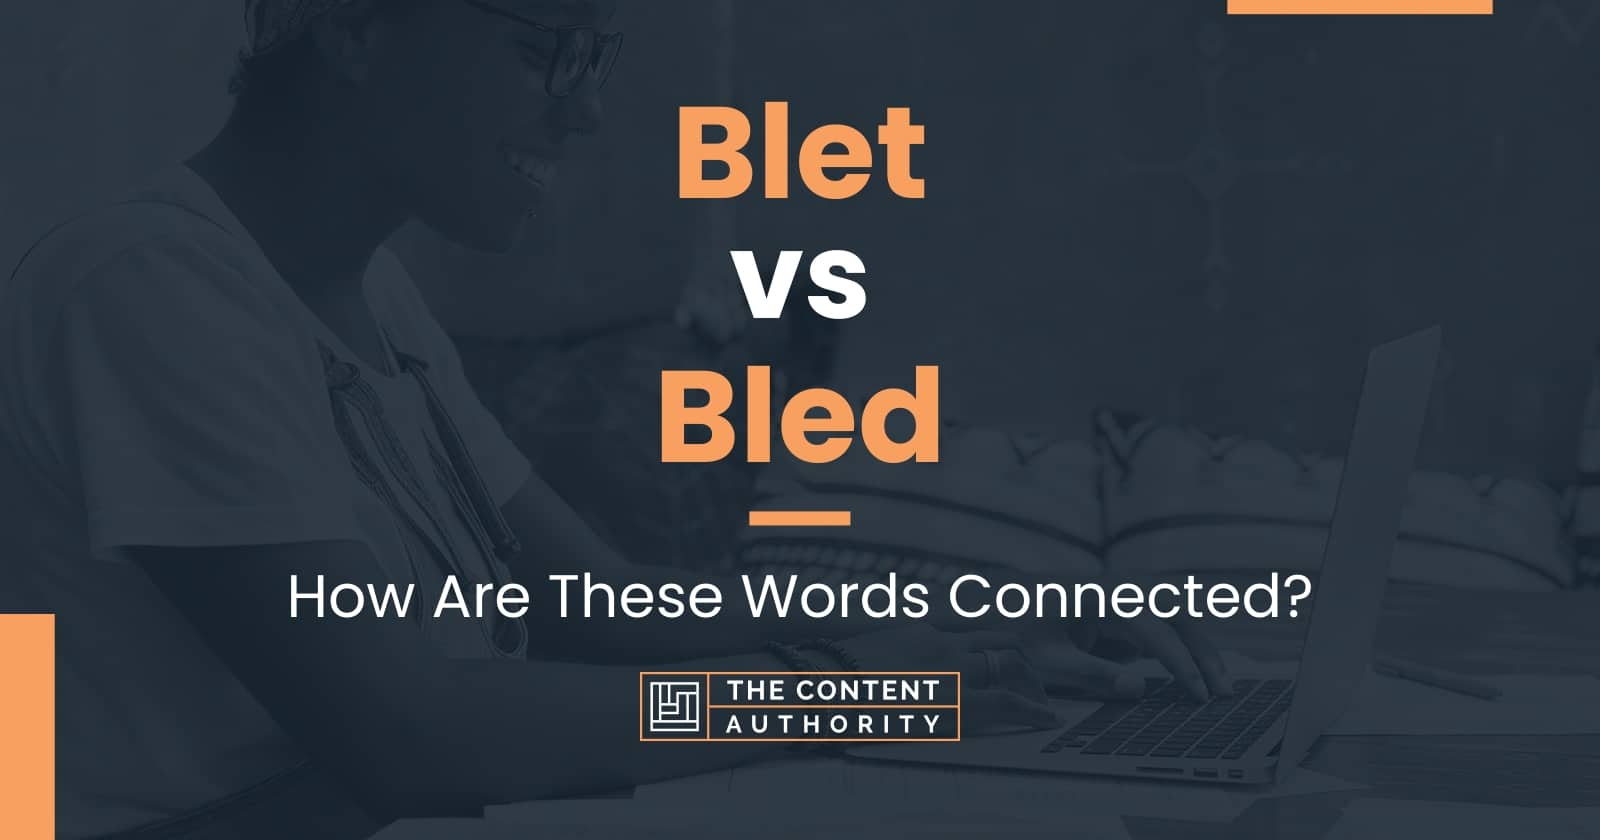 Blet vs Bled: How Are These Words Connected?